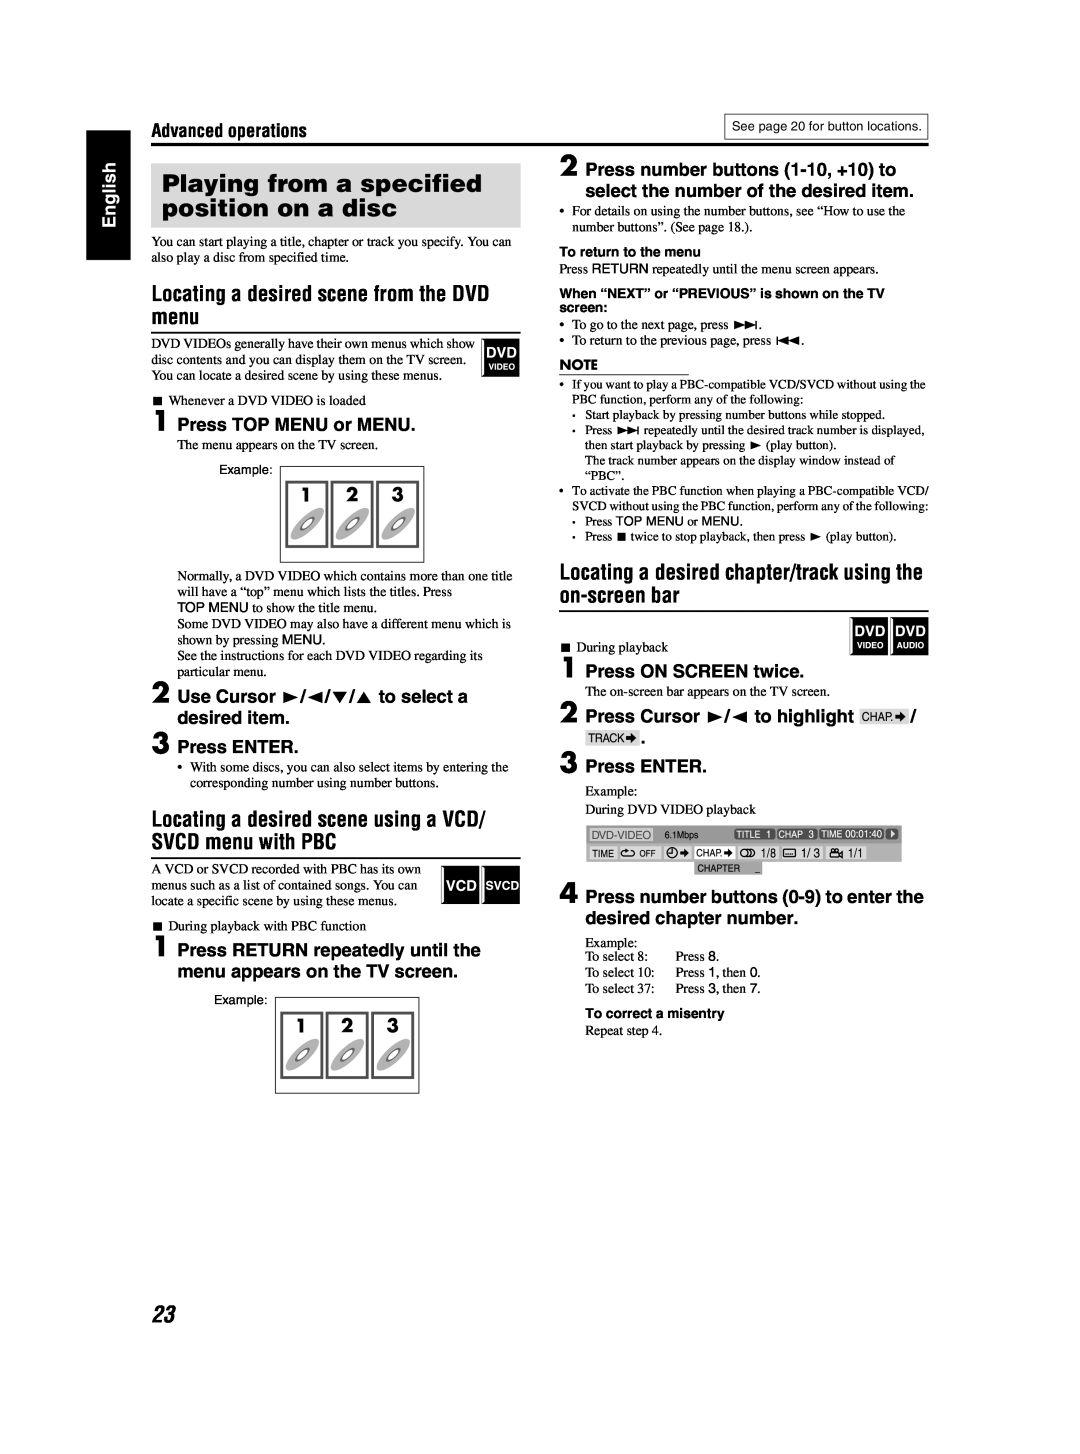 JVC TH-S3 TH-S2 manual Playing from a specified position on a disc 